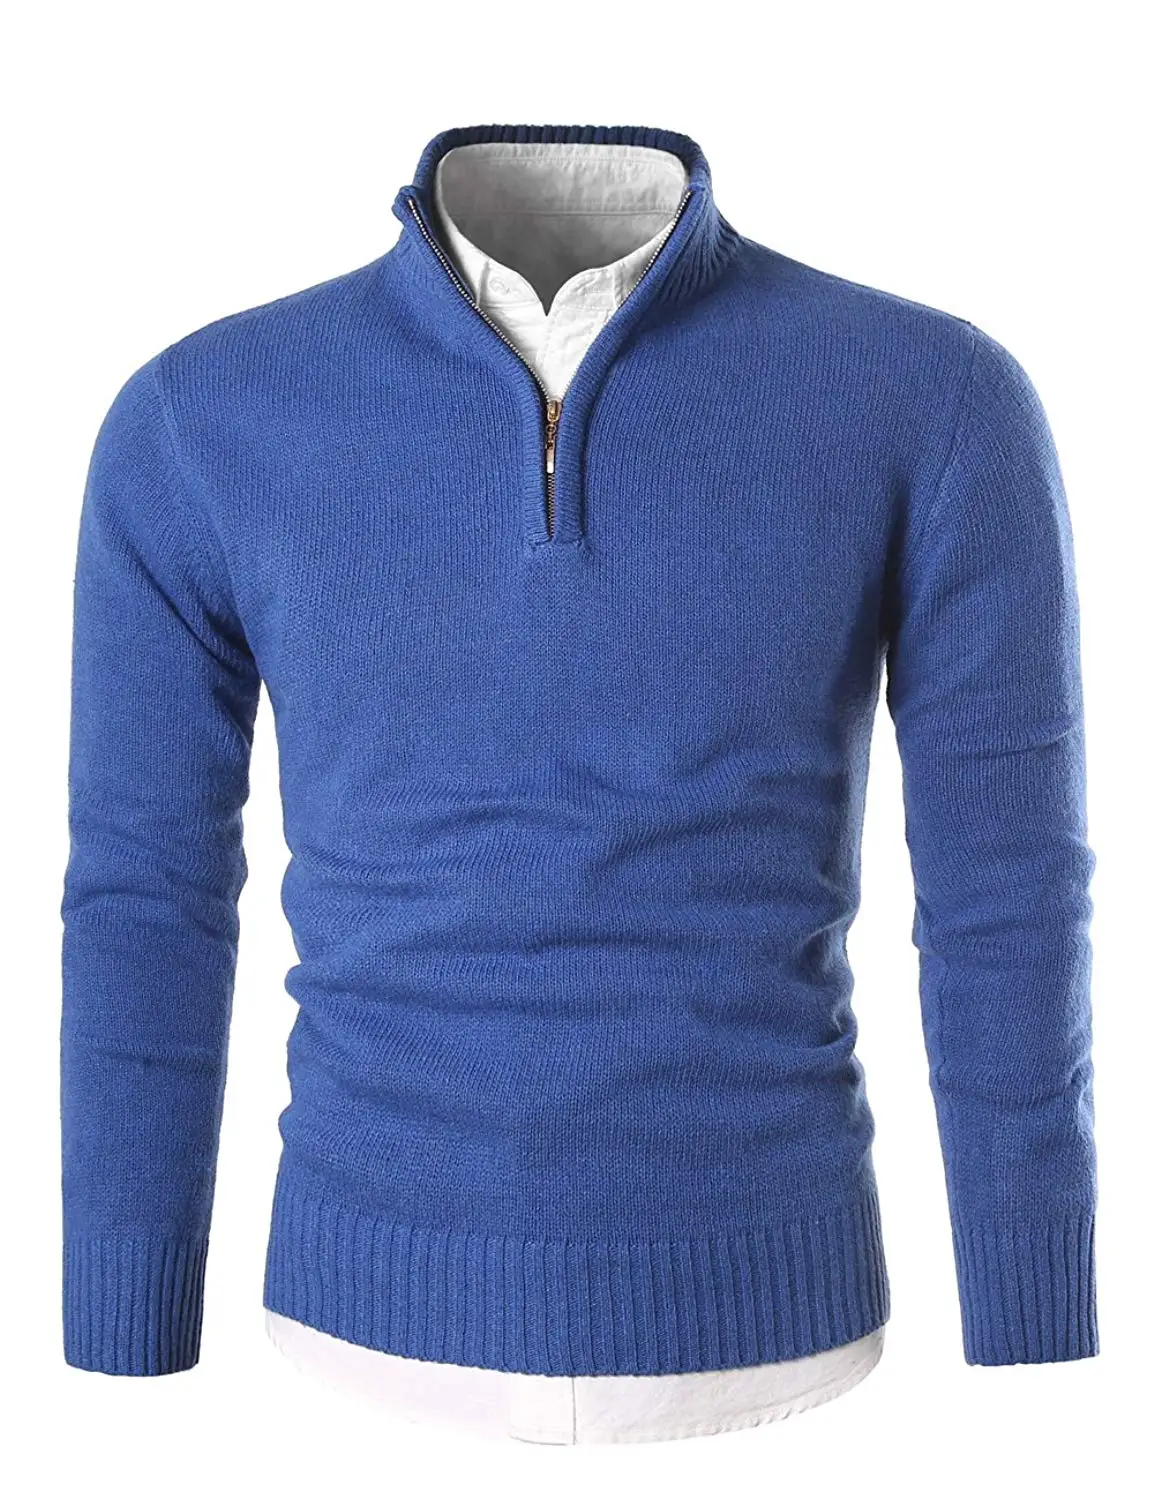 Cheap Mock Sweater Mens, find Mock Sweater Mens deals on line at ...